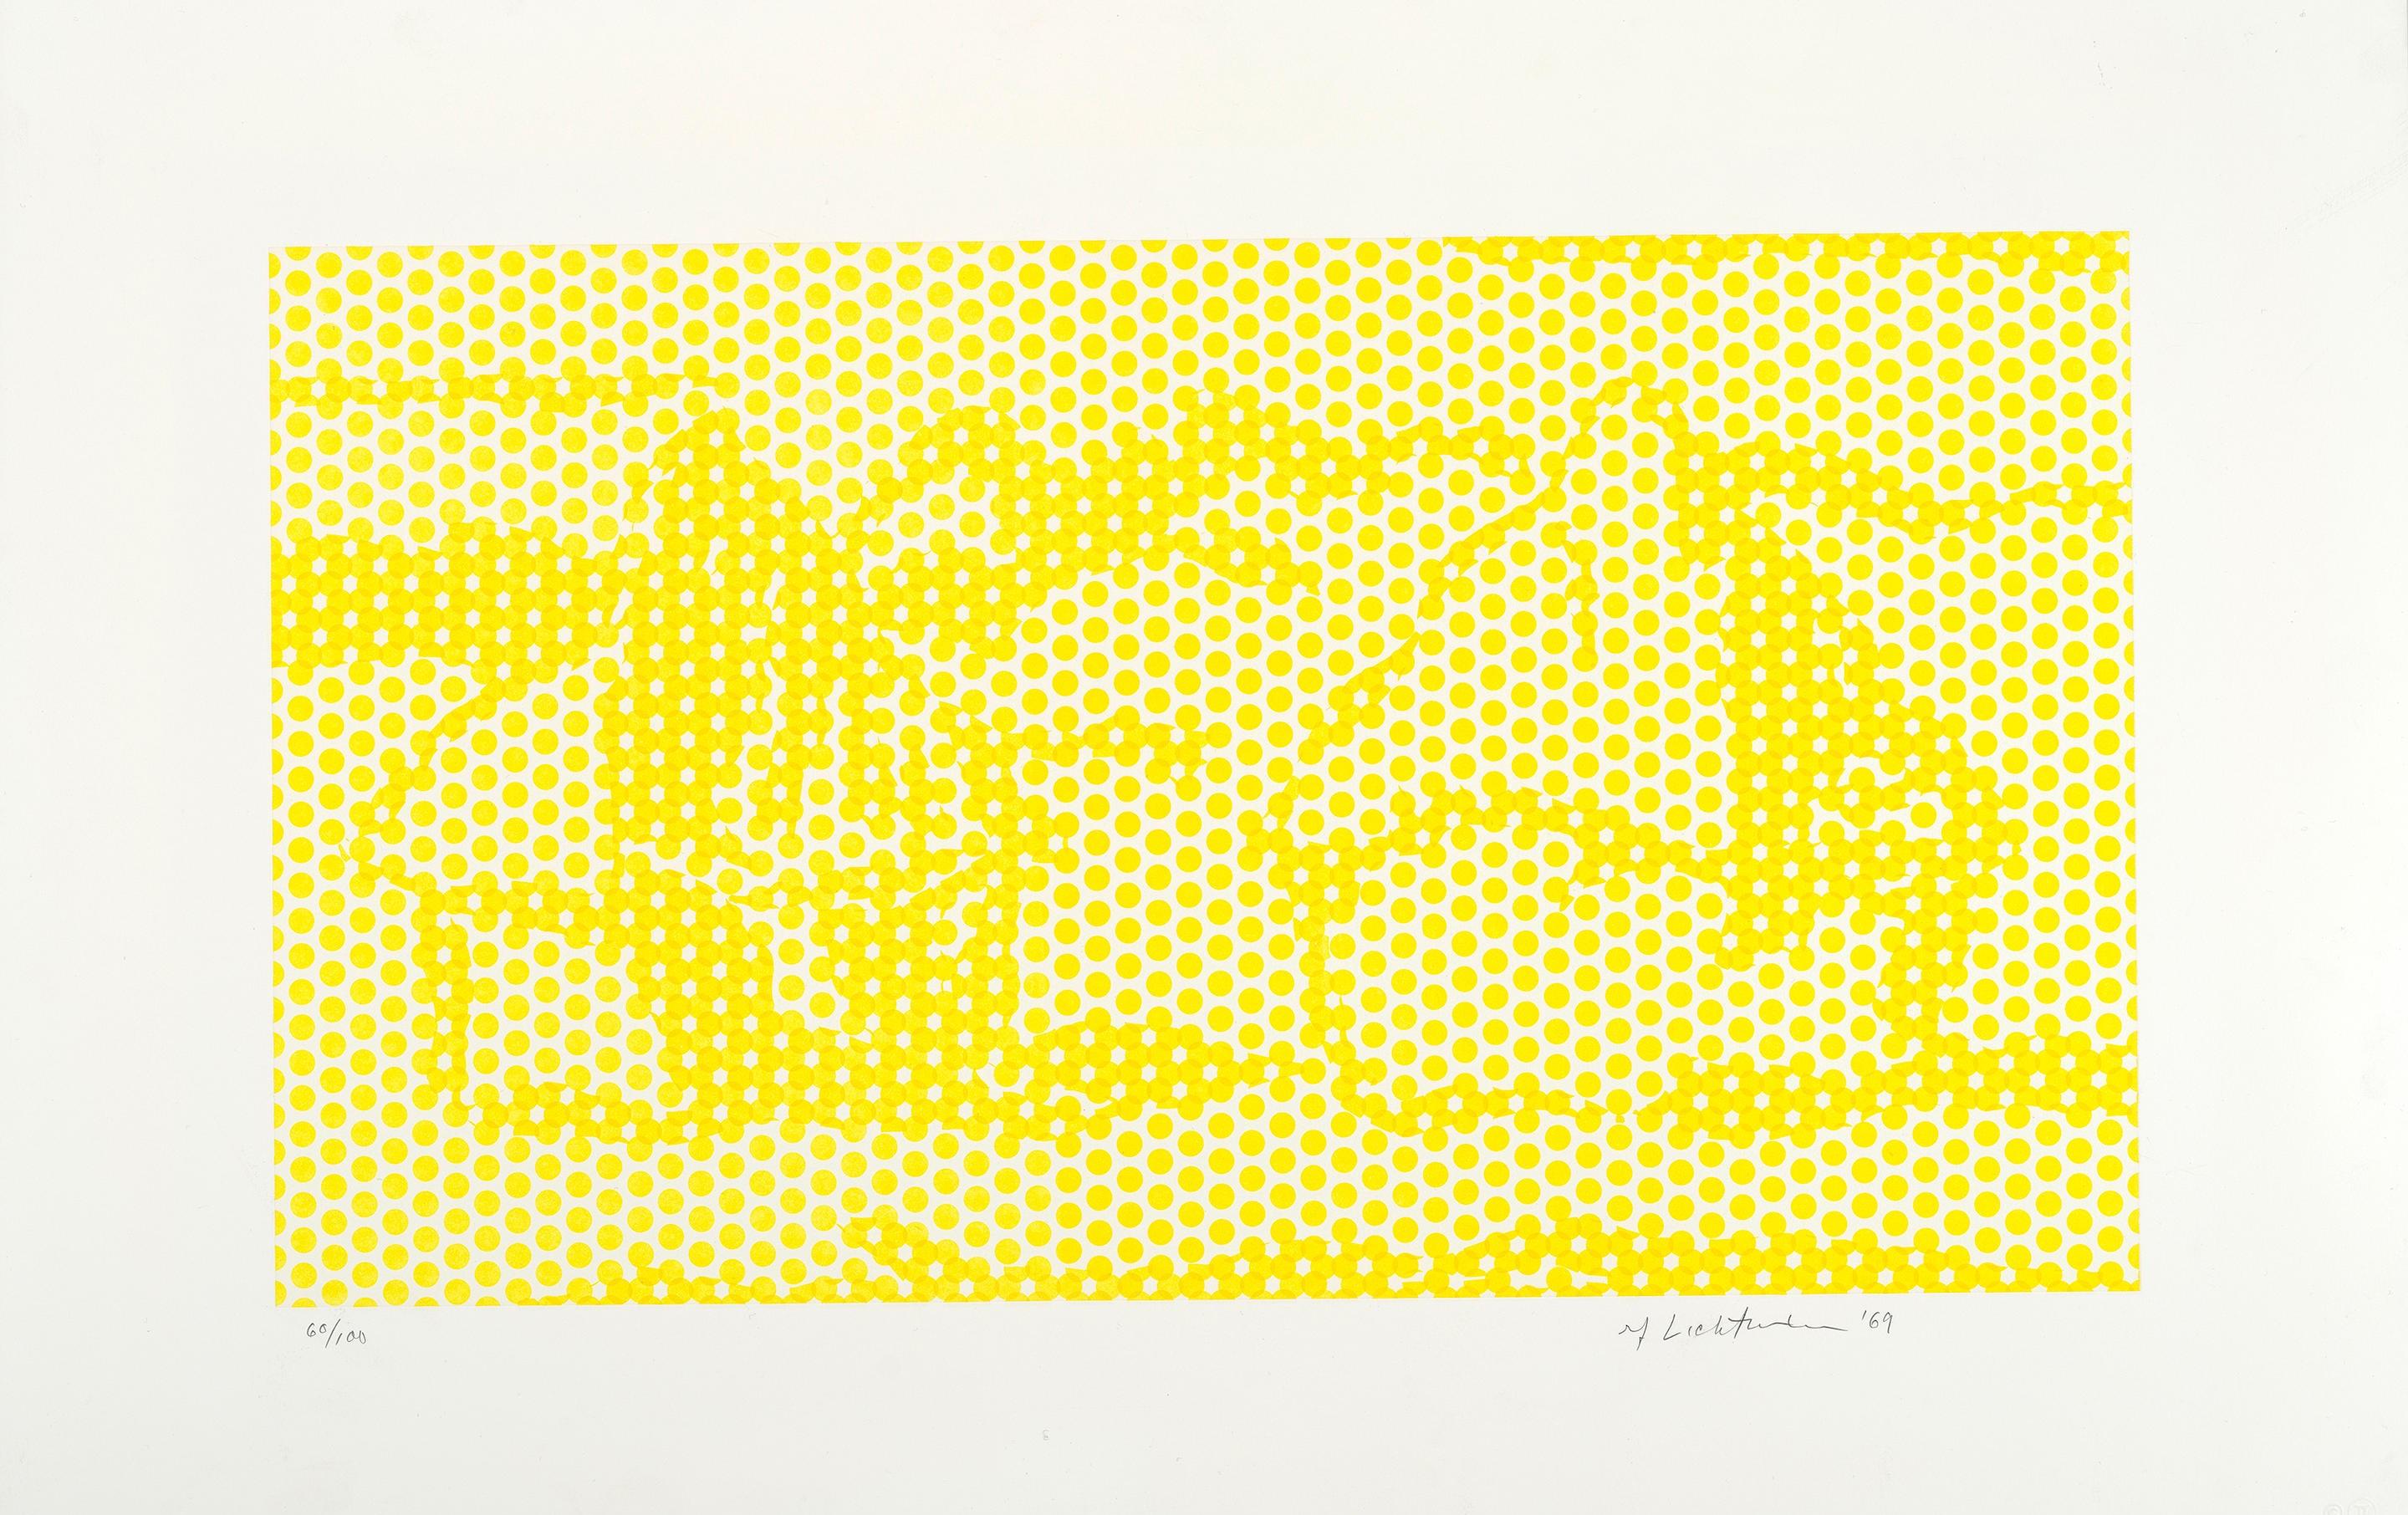 Haystack #1, 1969
Lithograph and screenprint on Rives BFK paper
Signed, dated and numbered in pencil
Publisher: Gemini G.E.L., Los Angeles
Literature: Corlett 65